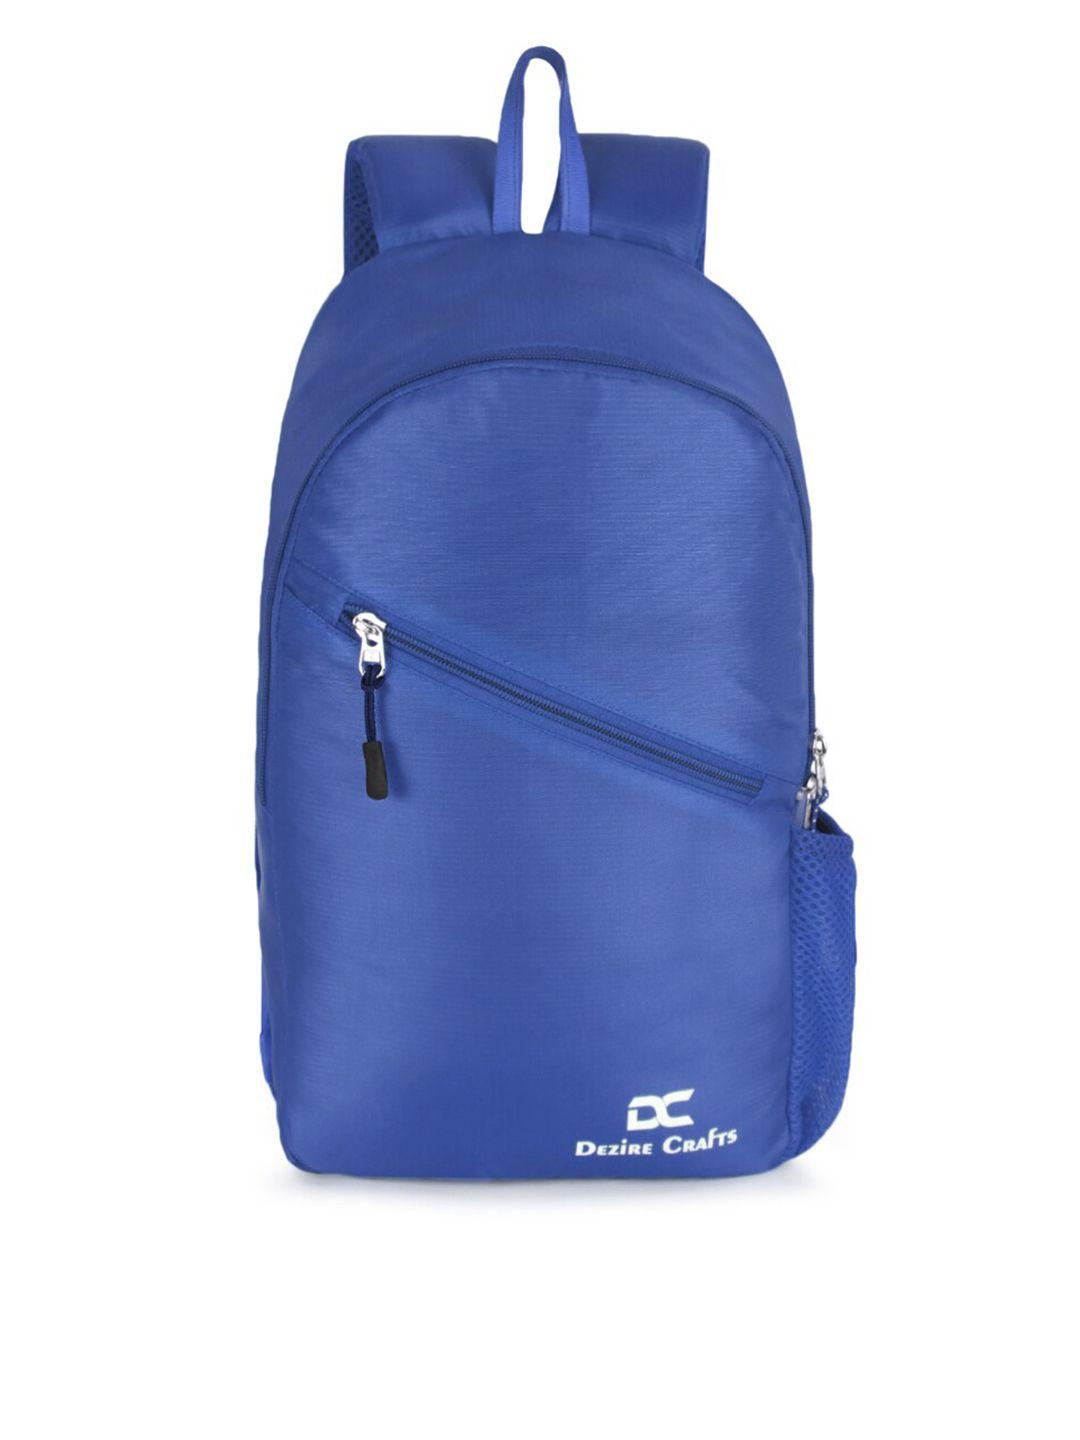 dezire crafts unisex blue & white solid backpack